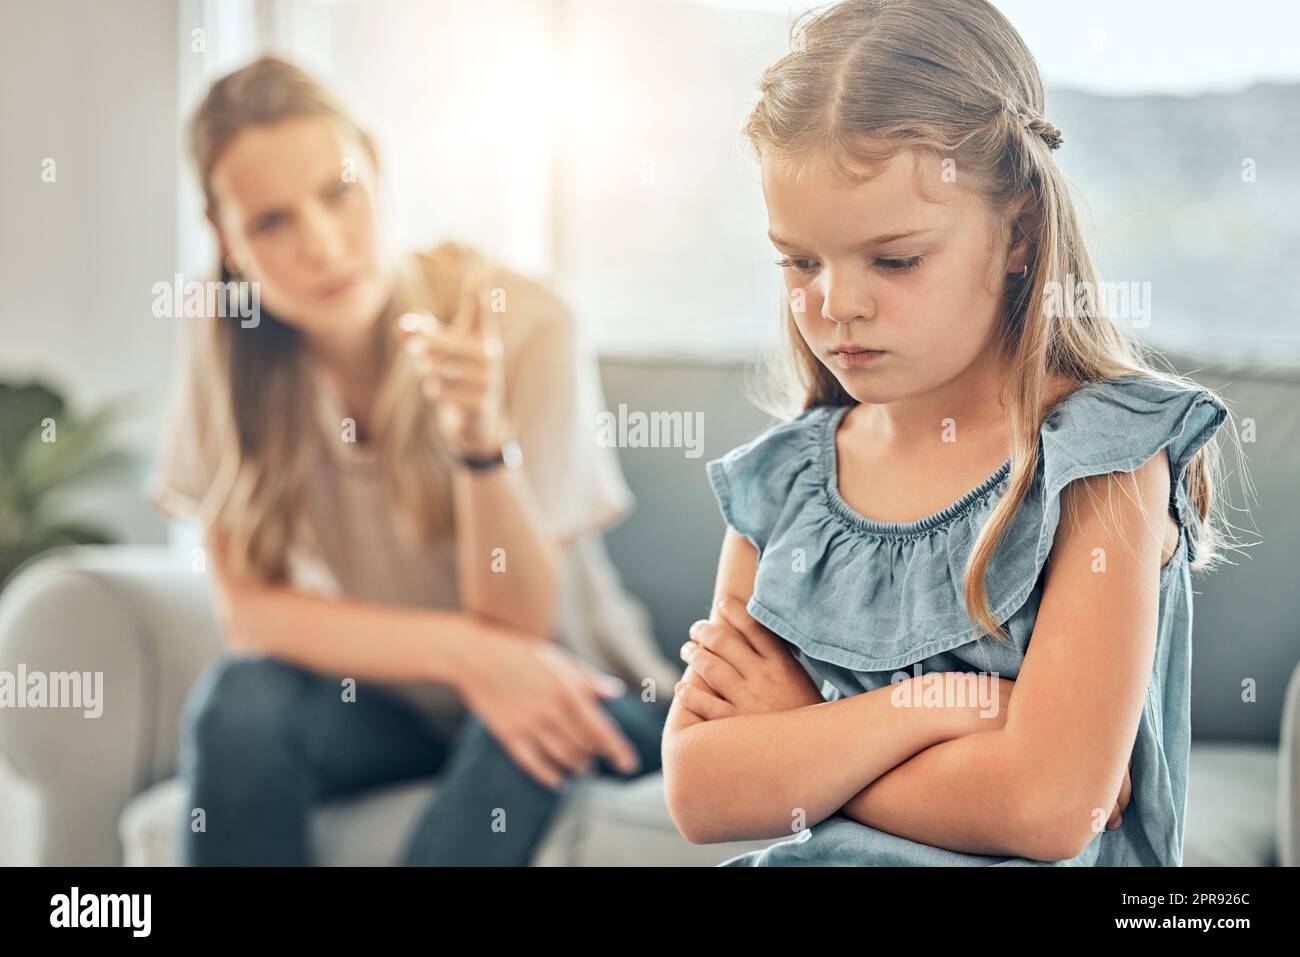 Closeup of an adorable little girl standing with arms crossed and looking upset while being scolded and reprimanded by her angry and disappointed mother at home. A woman punishing her young daughter Stock Photo